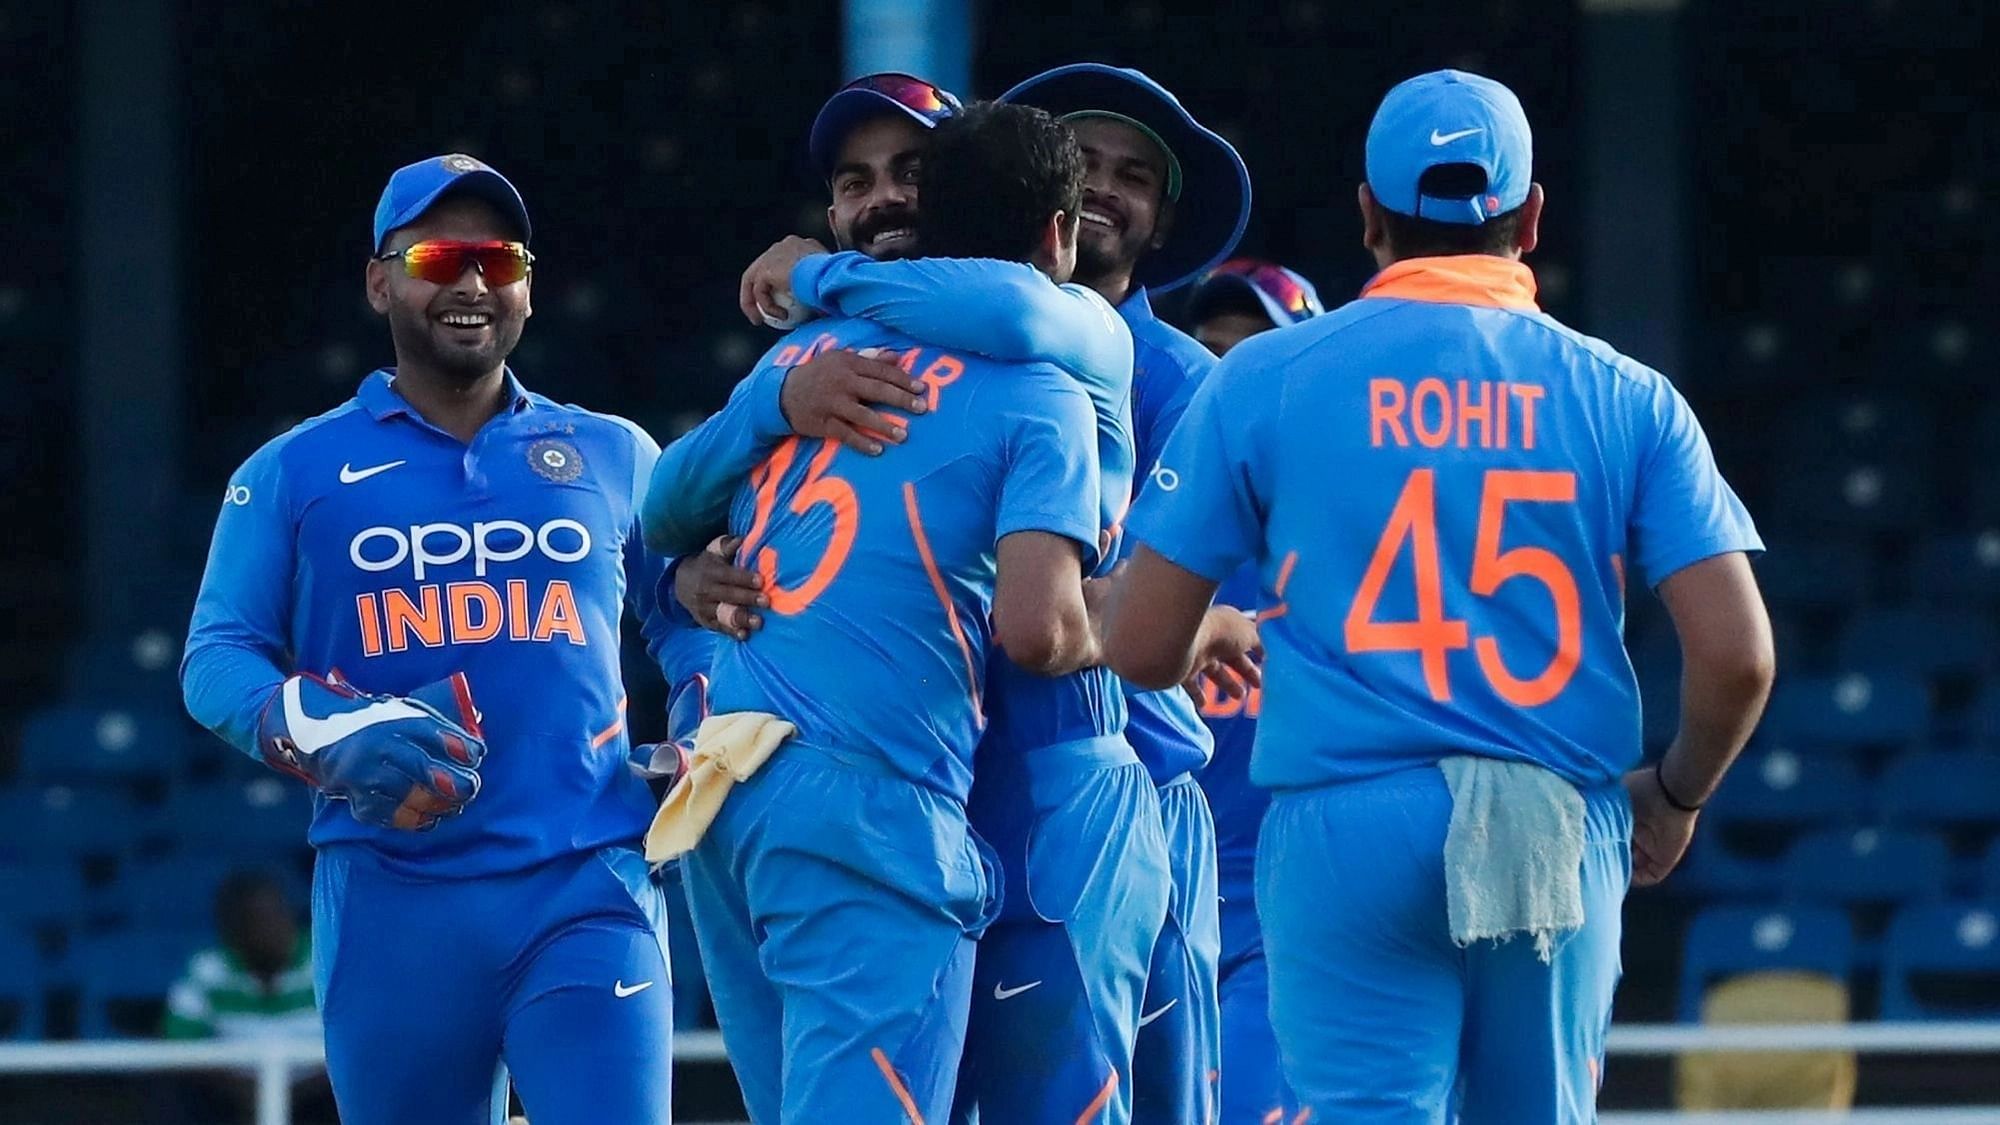 India vs West Indies 3rd ODI Live Streaming in India Date, Time, Venue, Live Broadcasting Channel and App, IND vs WI Match Details Here